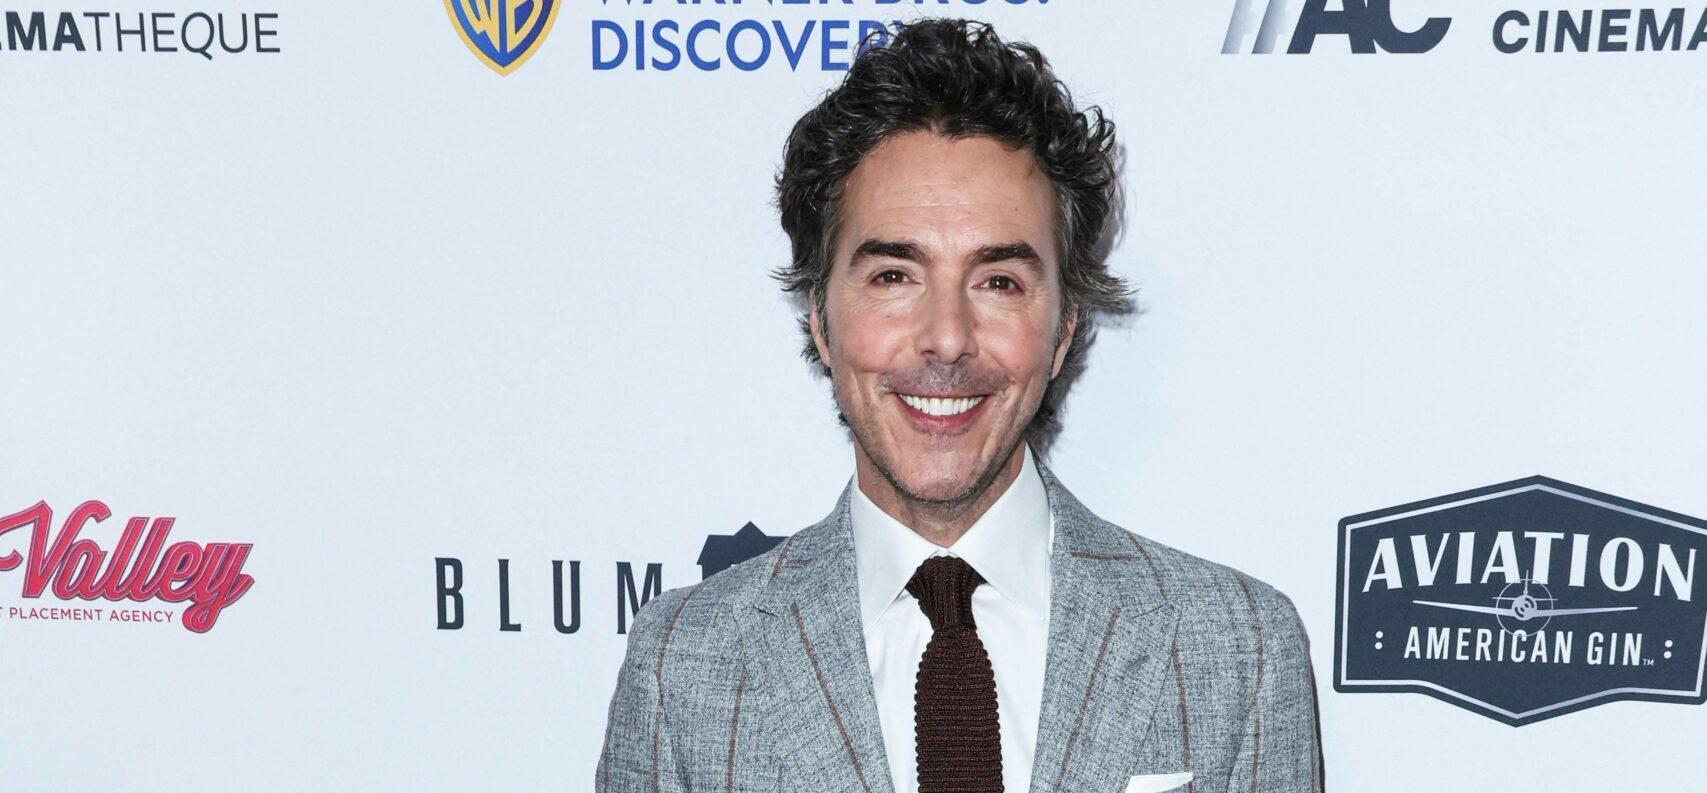 Shawn Levy Gives Fans An Exciting Update About His Star Wars Movie!